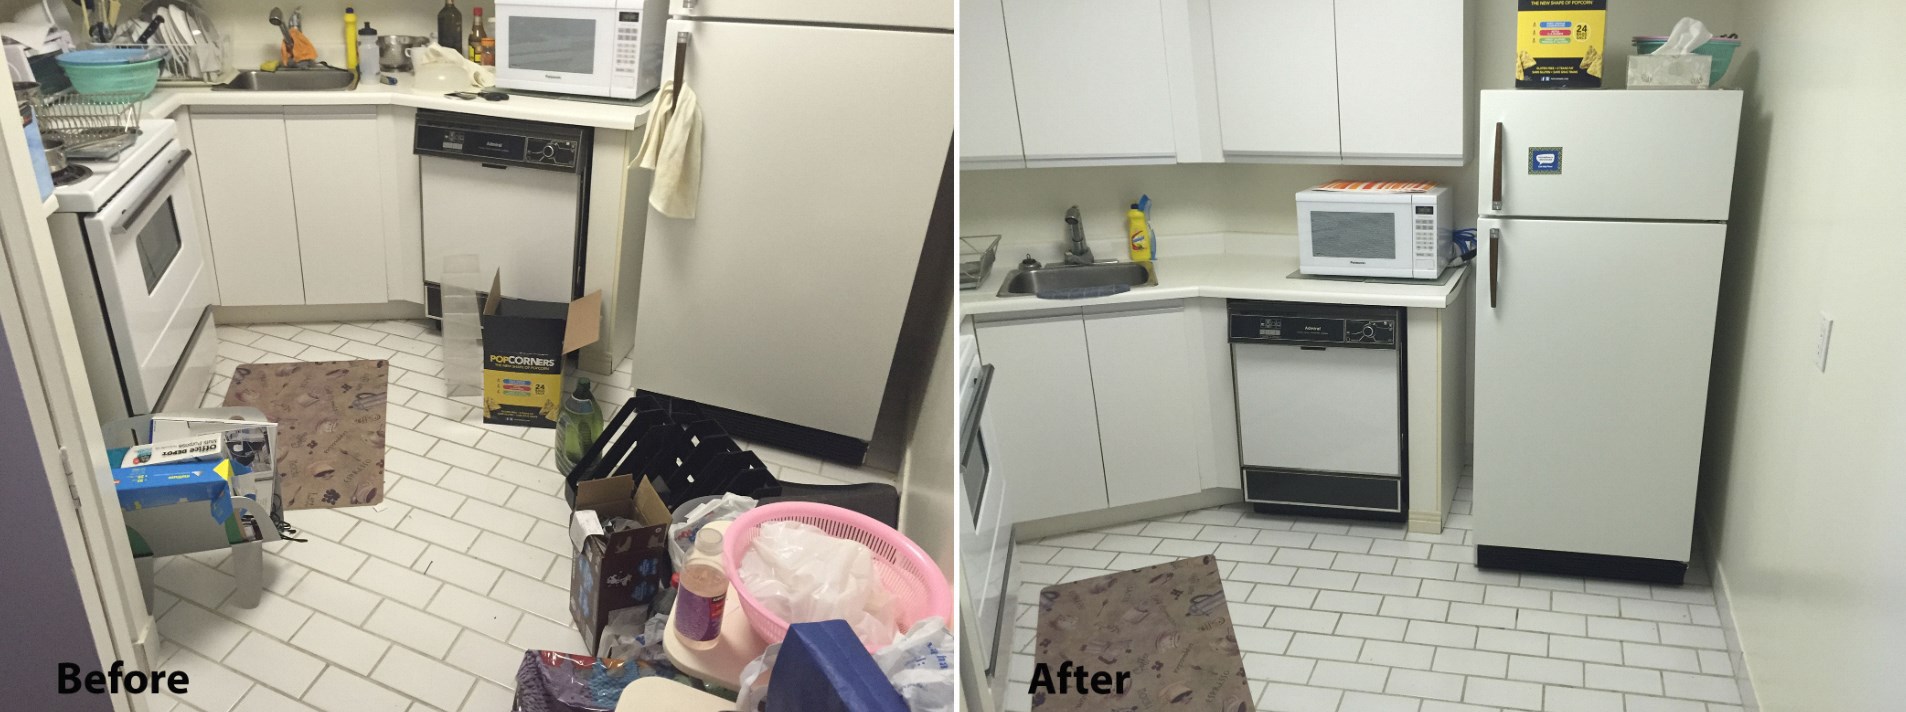 Kitchen minimalist declutter before and after